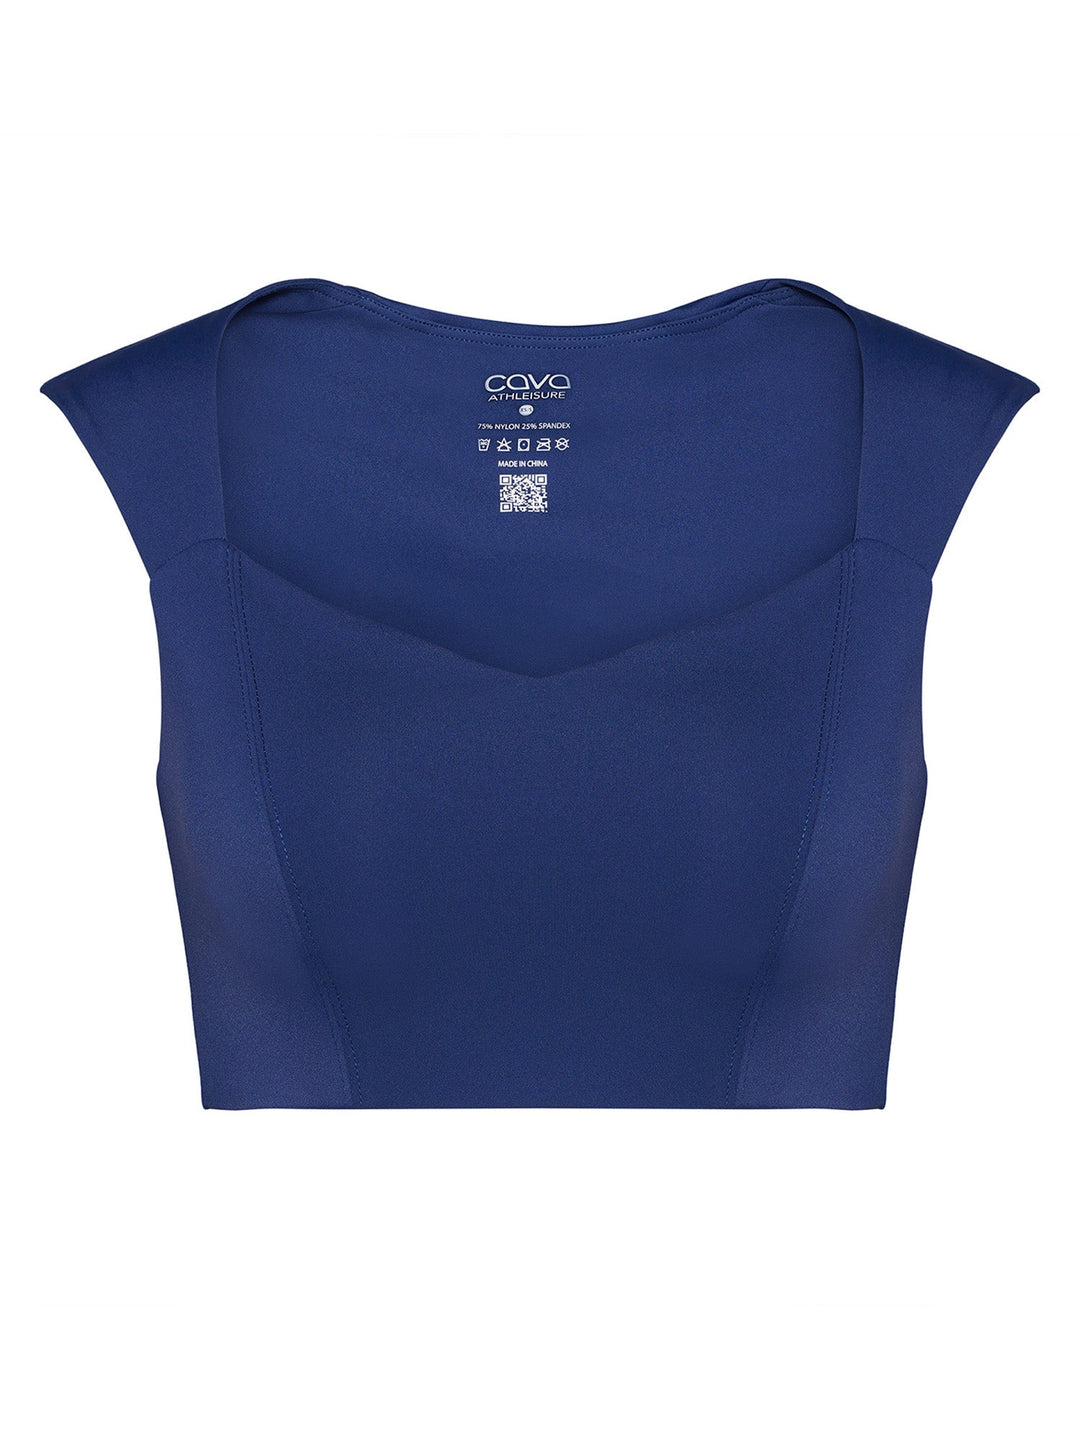 Royal Blue Radiant Sweetheart Neck top